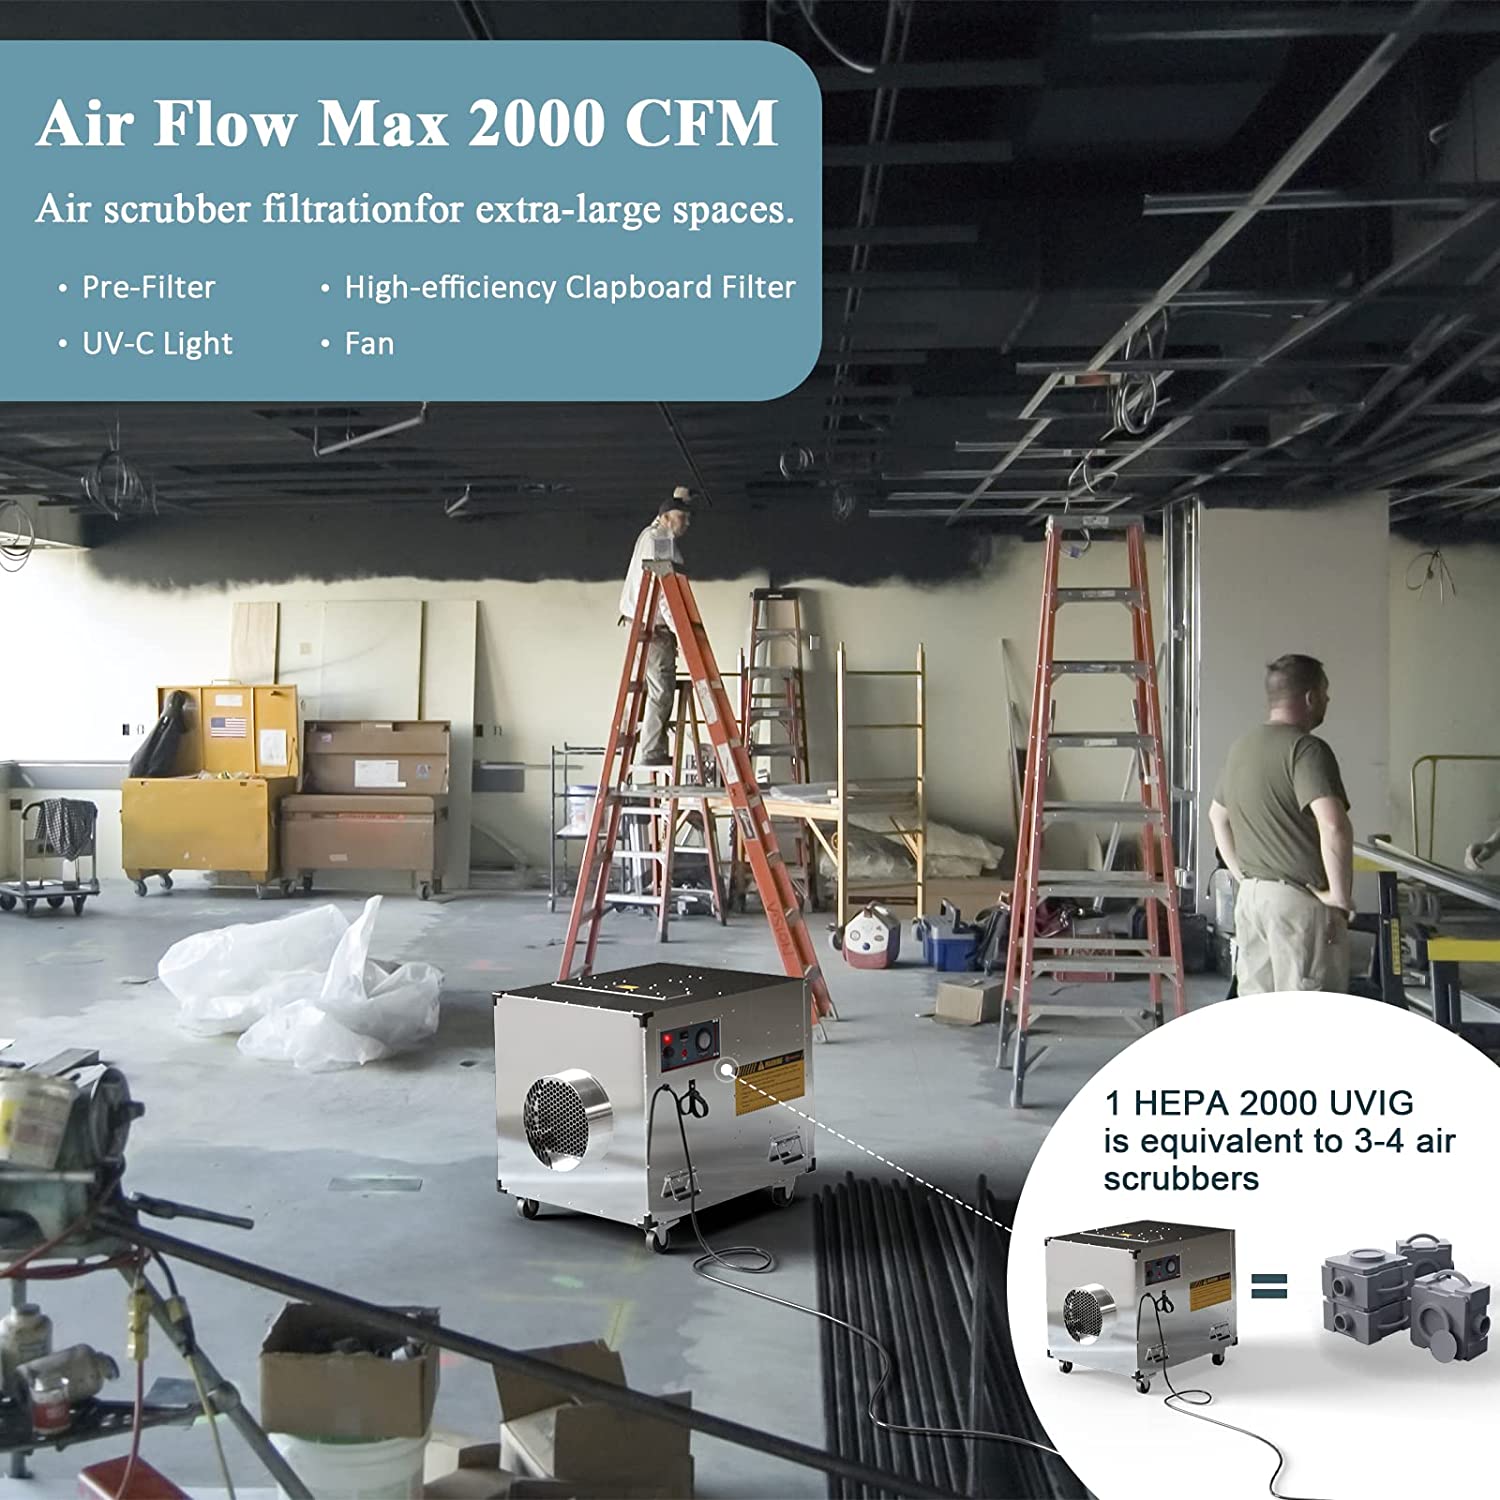 Abestorm HEPA 2000 UVIG Commercial Air Scrubber Up to 2000 CFM